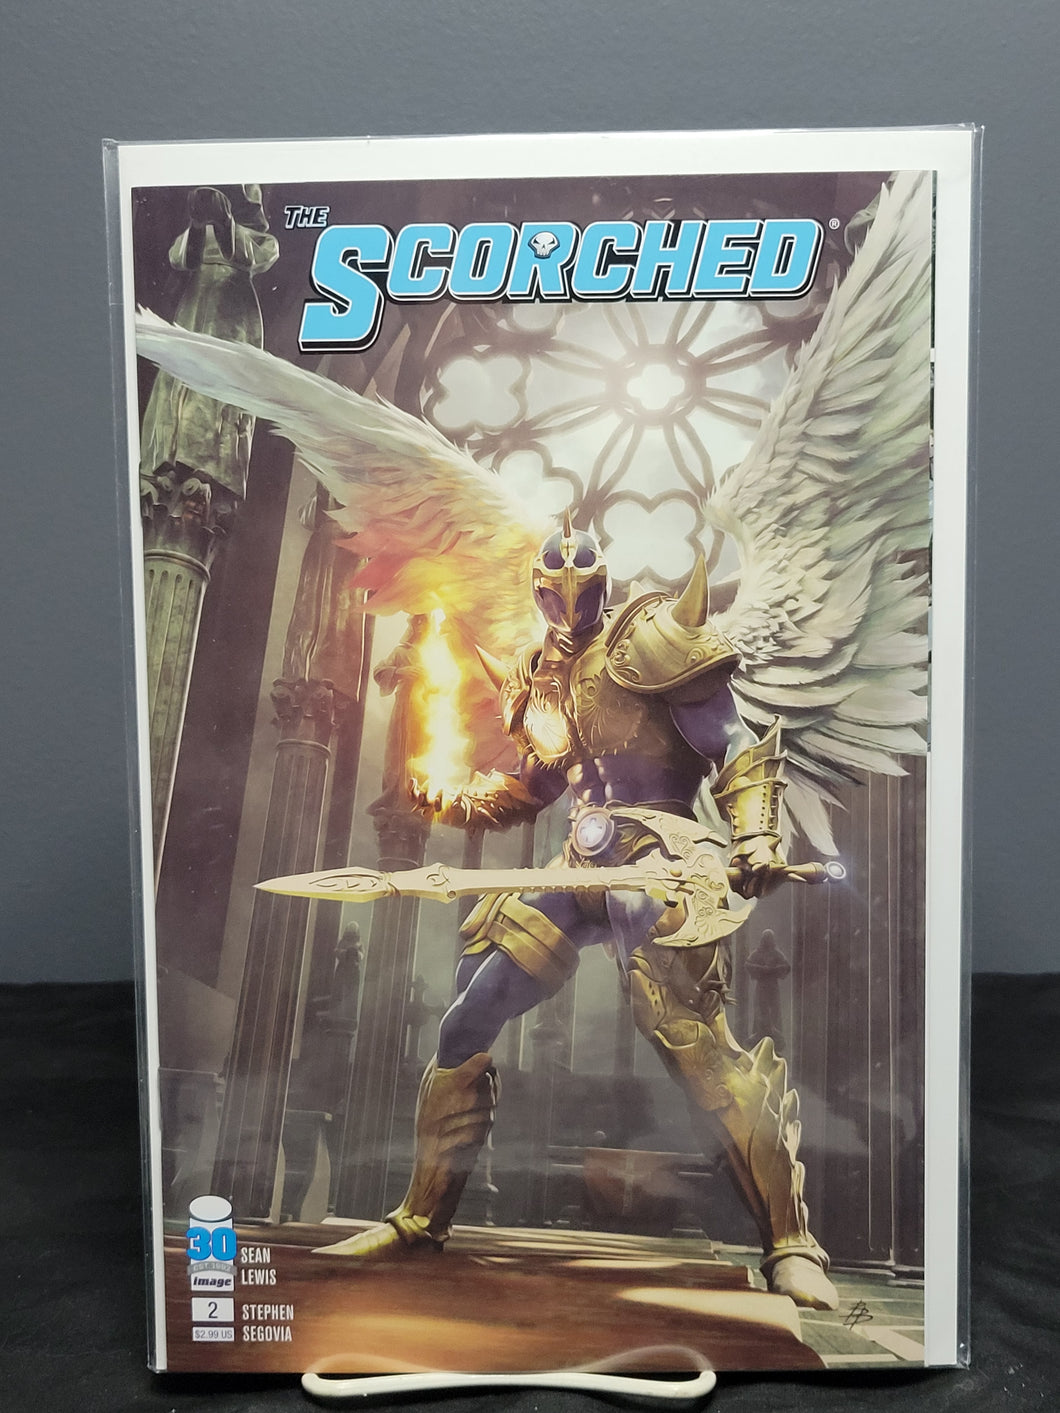 Scorched #2